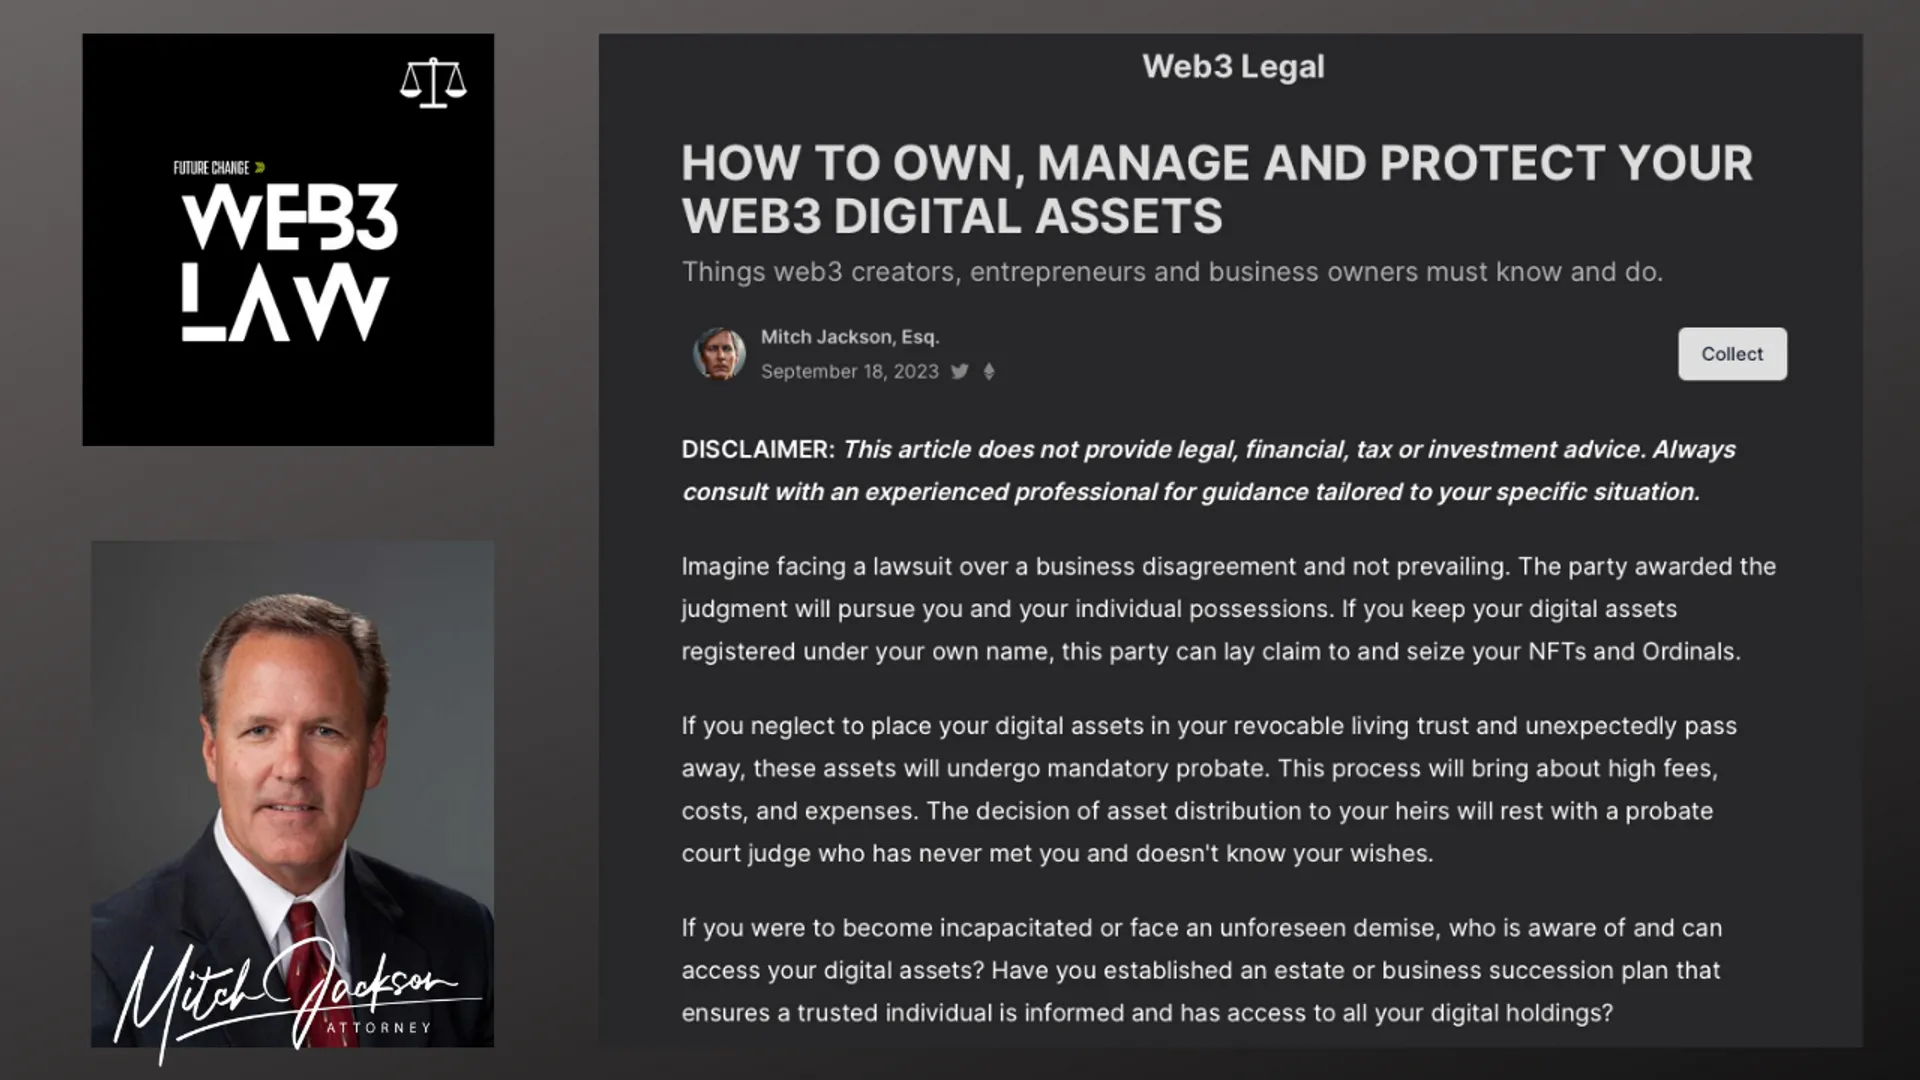 I'm now live on Paragraph, a new web3 newsletter platform that leverage web3 blockchains to provide better experiences. This issue is titled, "How to Own, Manage and Protect Your Web3 Digital Assets." Subscribe via your email (just like any other newsletter service) and if you're into web3, also "connect" and "collect" with your web3 wallet for exclusive free content and access! https://paragraph.xyz/@web3legal 